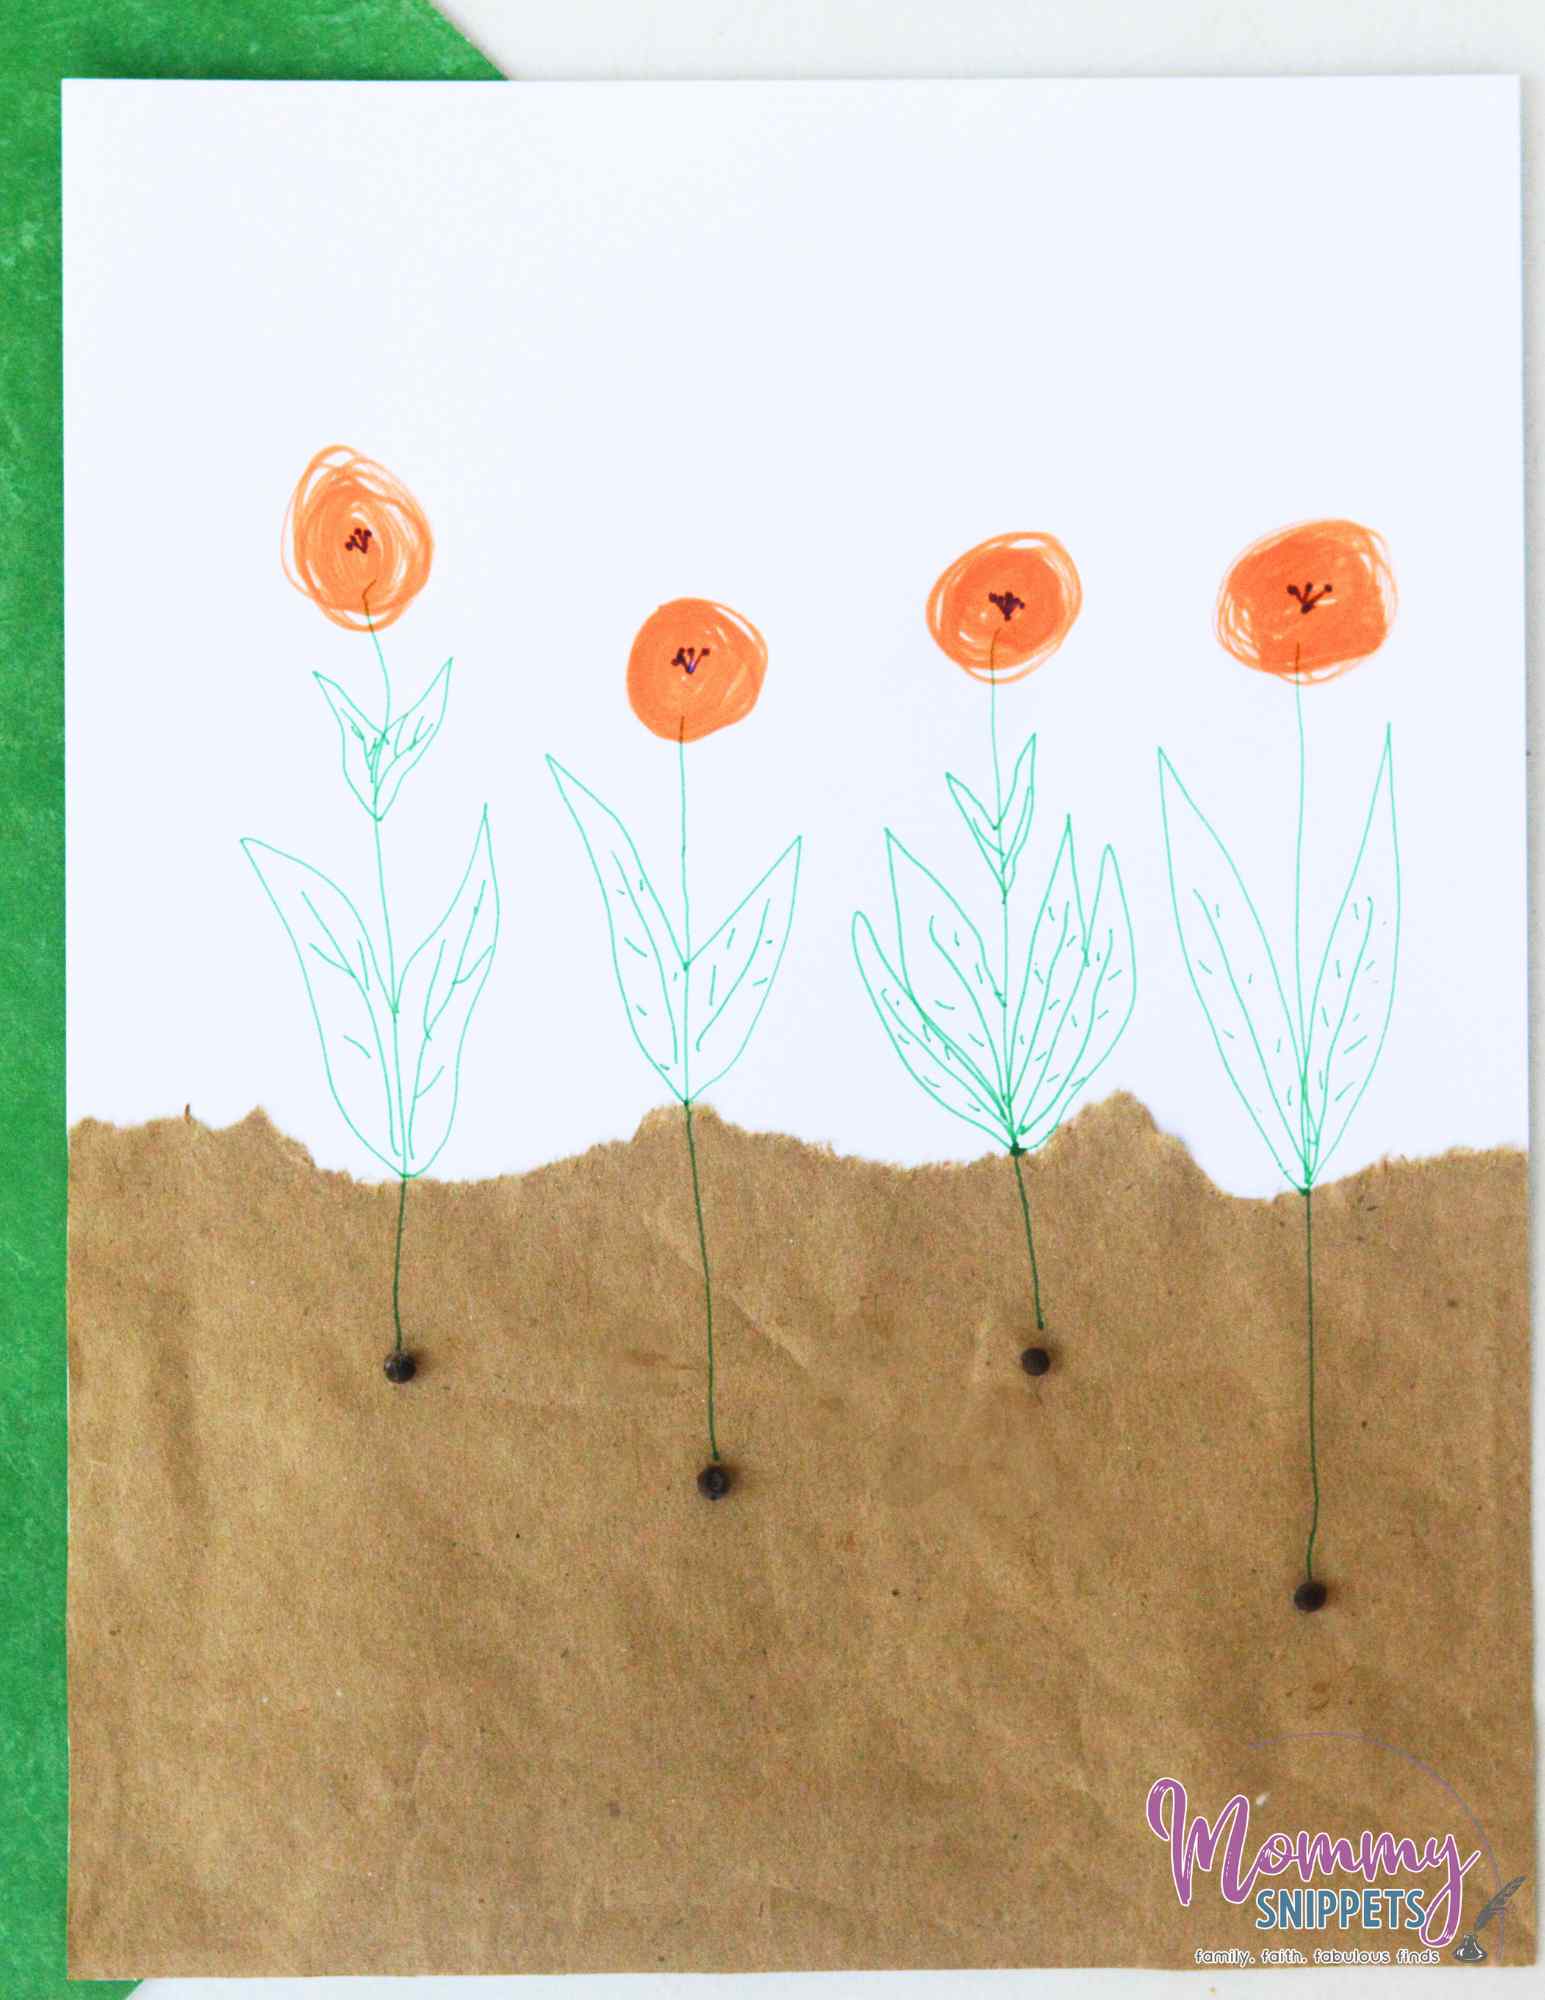 Parable of the Sower Lesson Craft for Kids